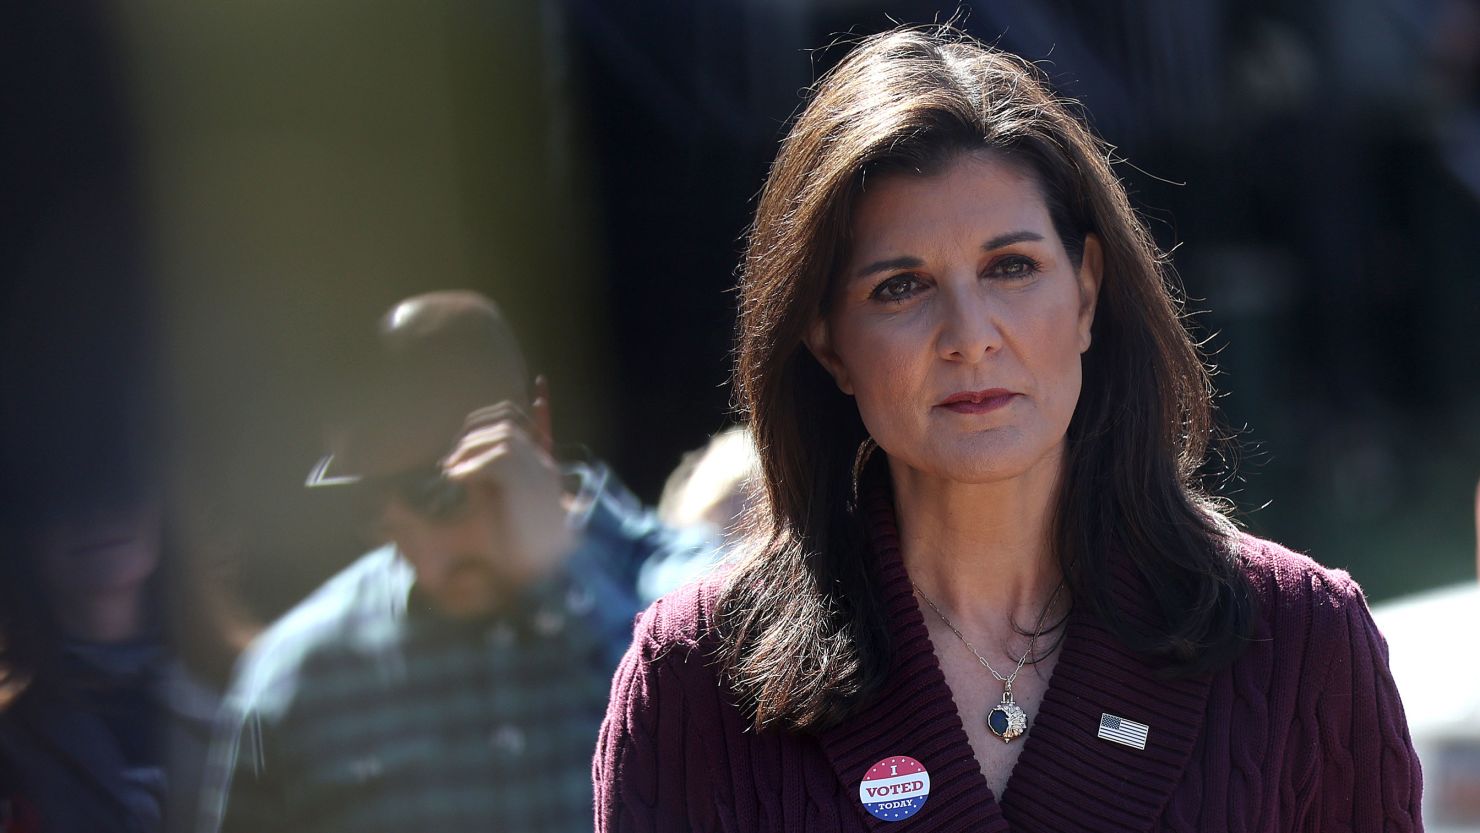 Former South Carolina Gov. Nikki Haley speaks to reporters after voting in the South Carolina Republican primary on February 24, 2024, in Kiawah Island.